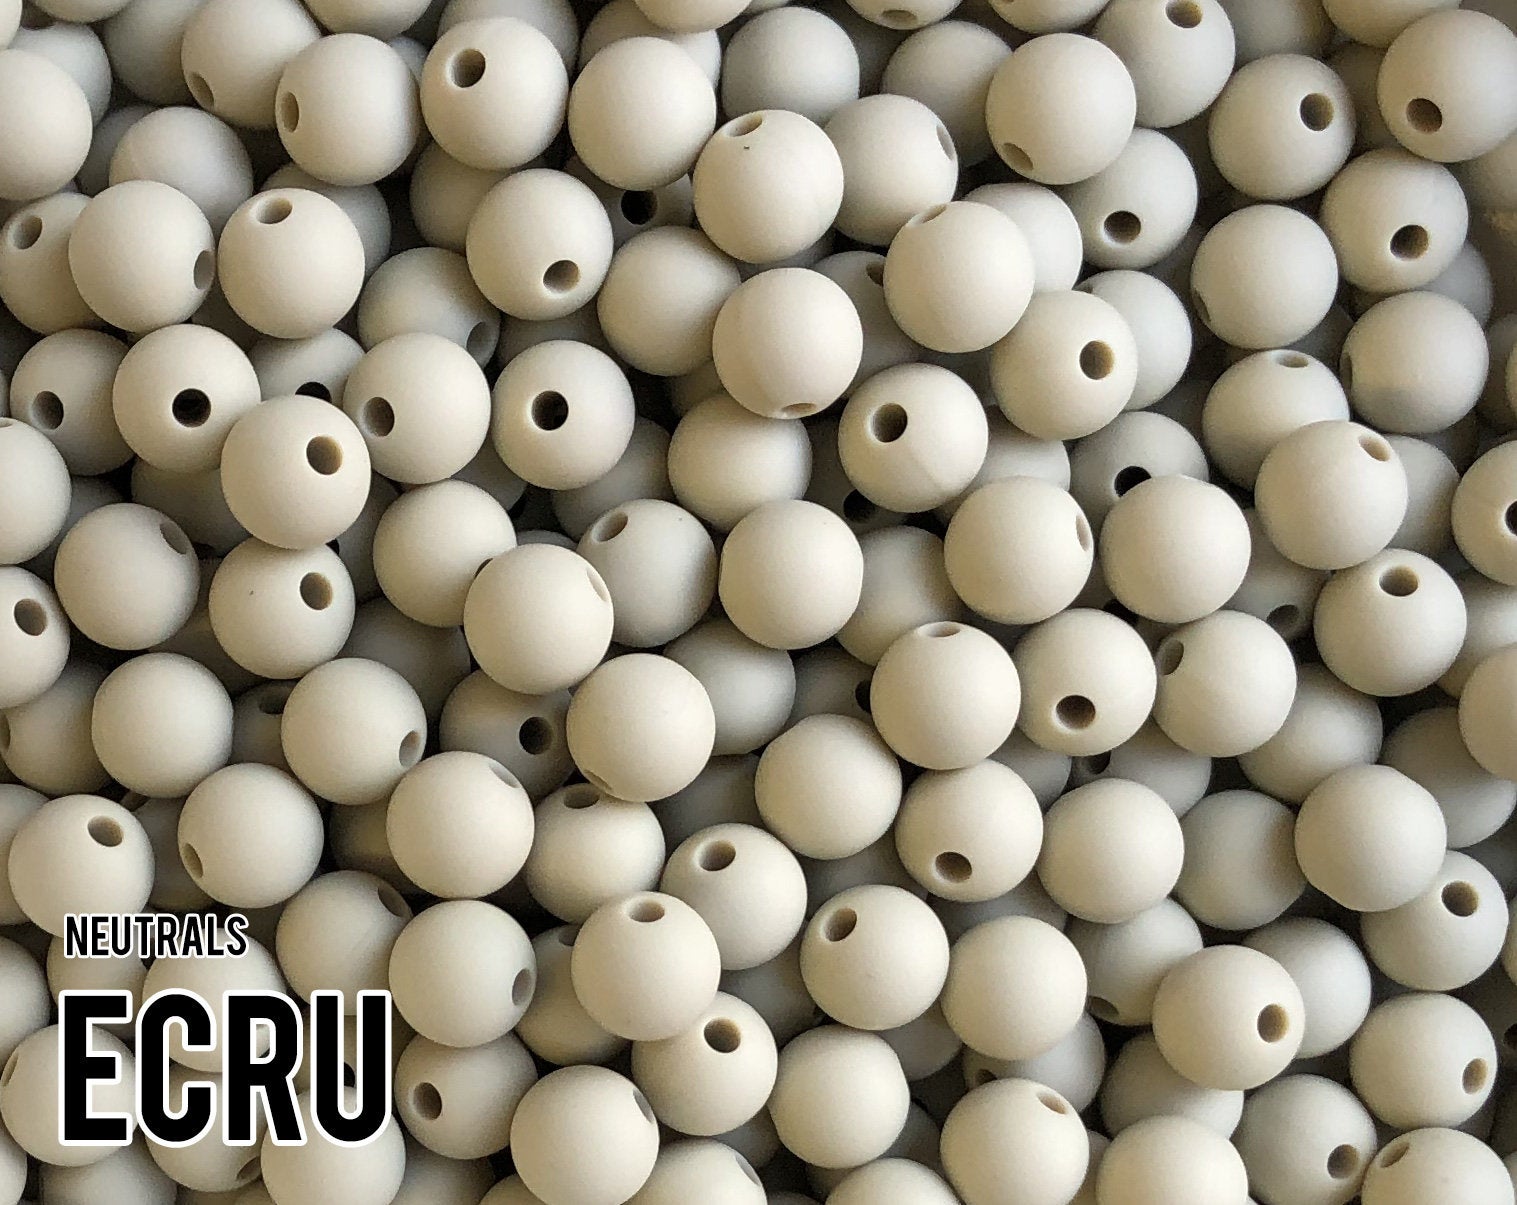 Silicone Beads, 9 mm Round  Ecru Silicone Beads 5-1,000 (aka off white, tan, beige, light brown) Bulk Silicone Beads Wholesale